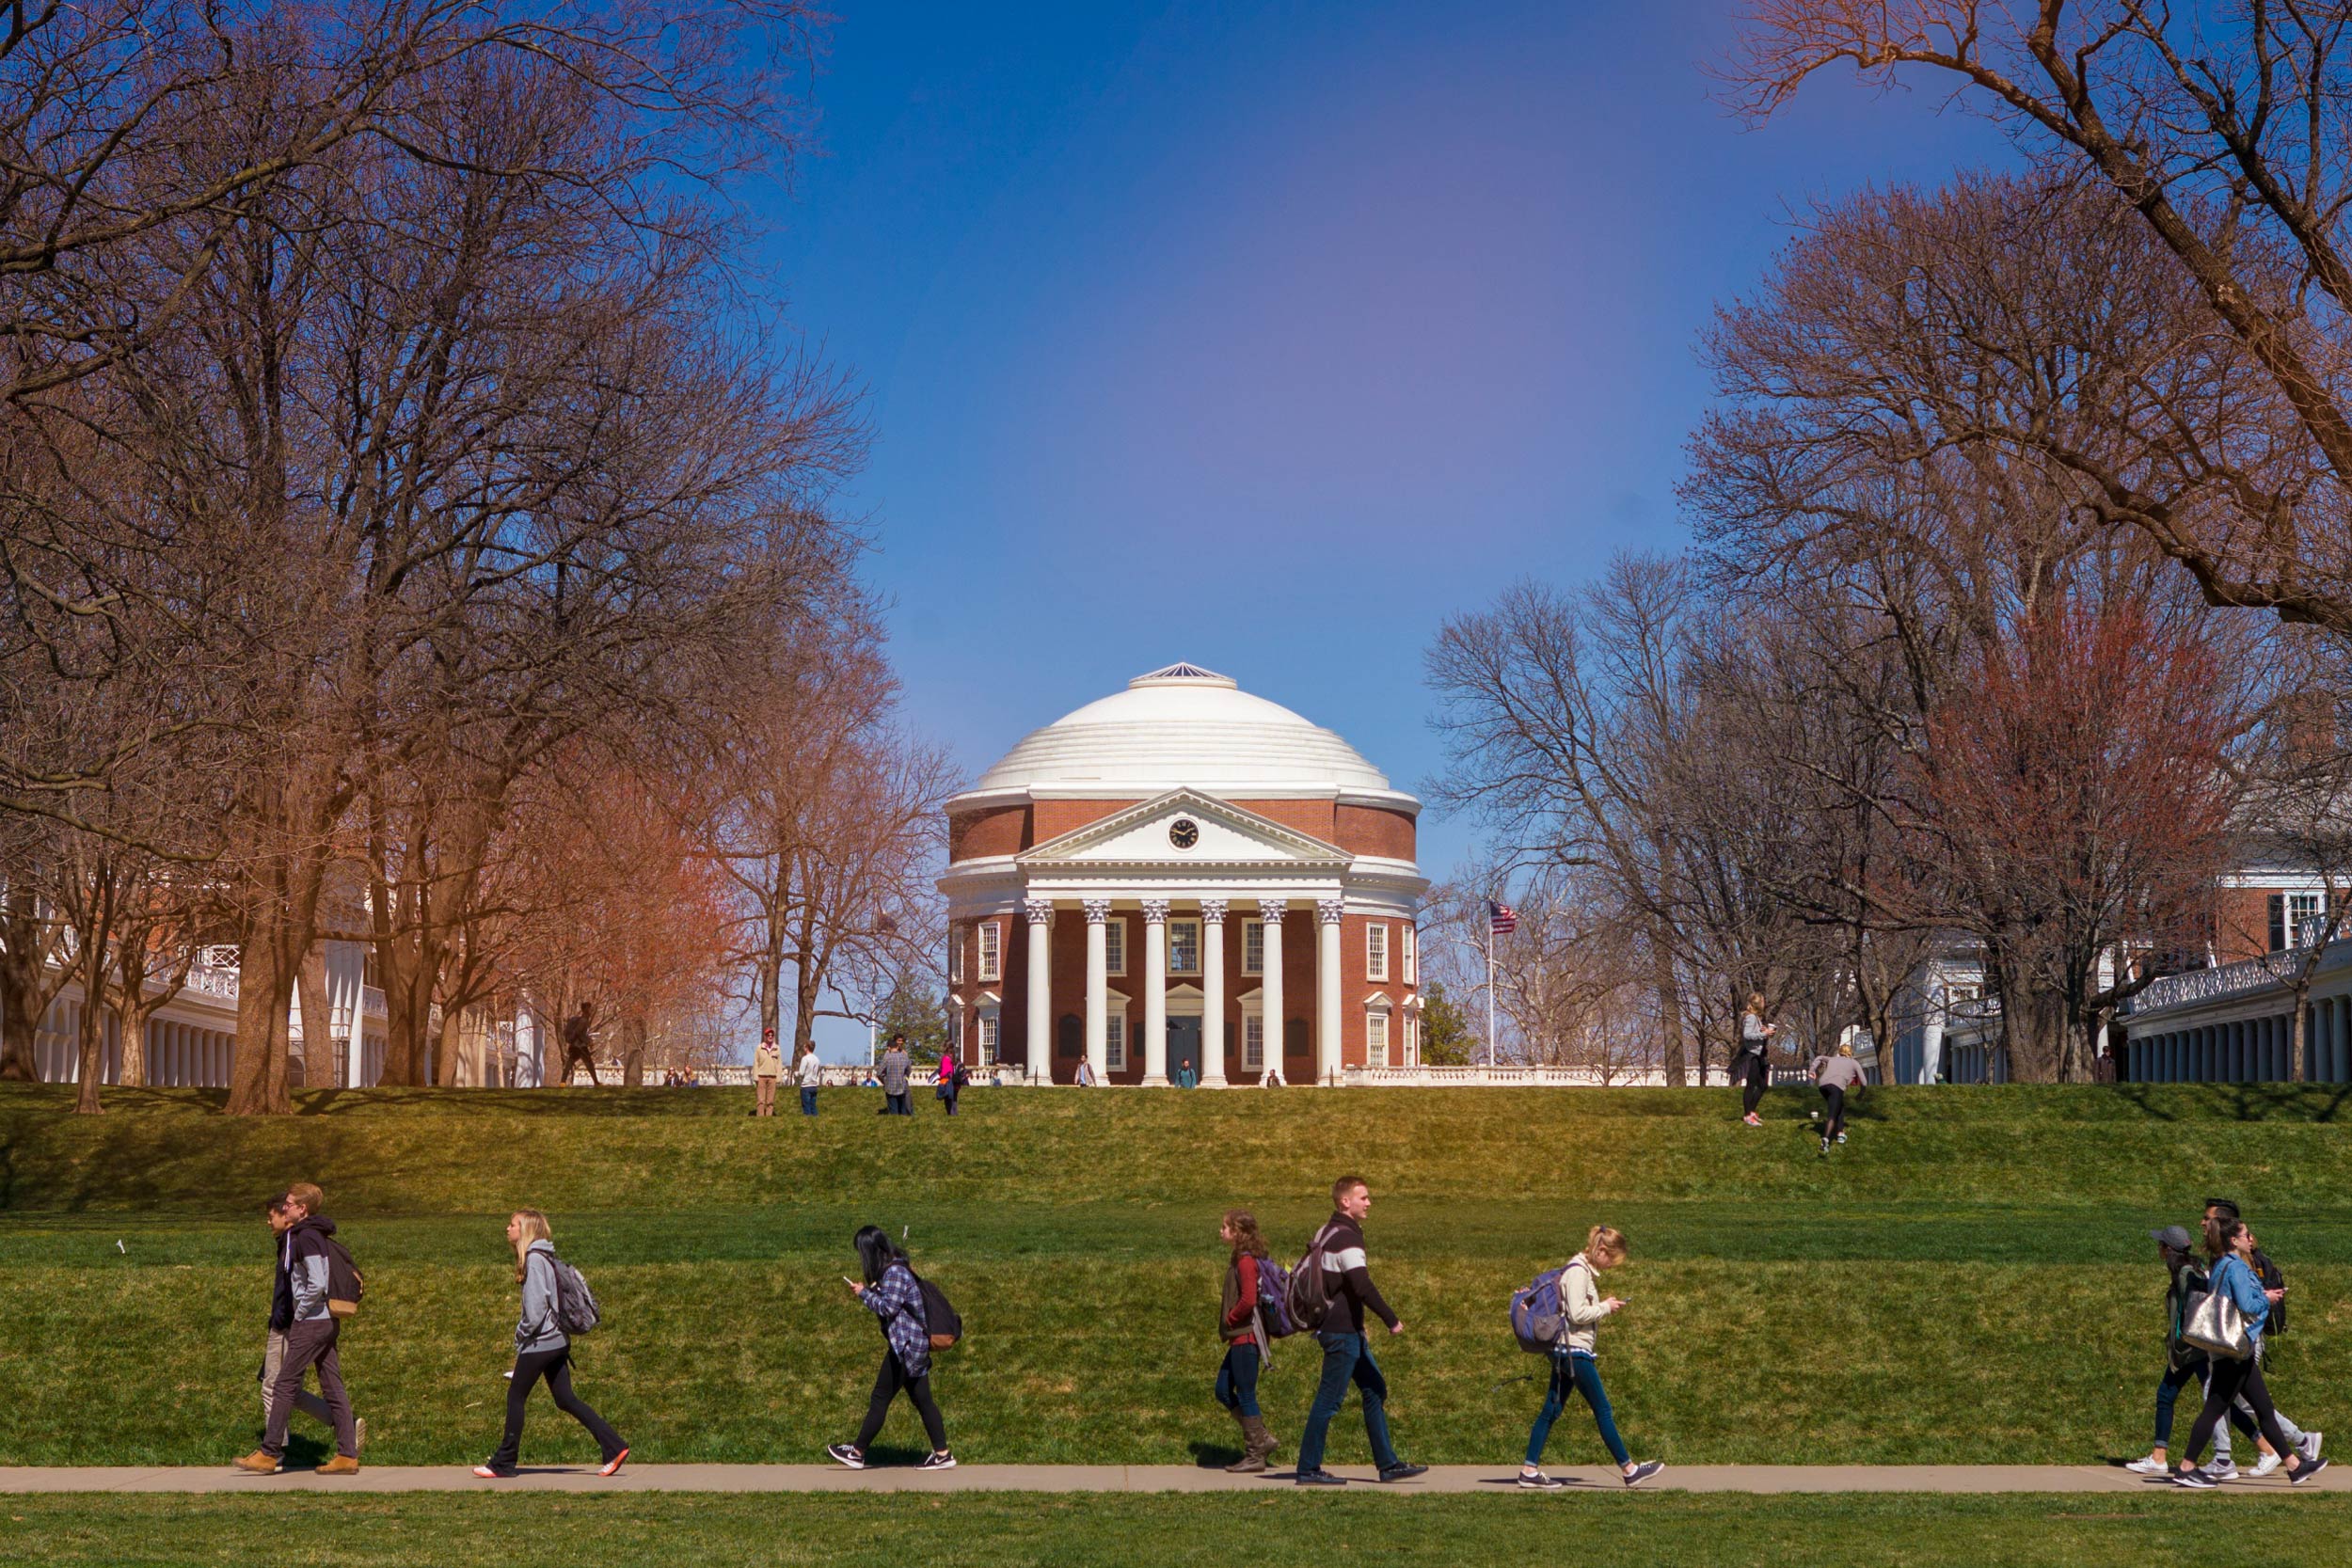 The Rotunda from the Lawn with students walking on the sidewalks on the Lawn